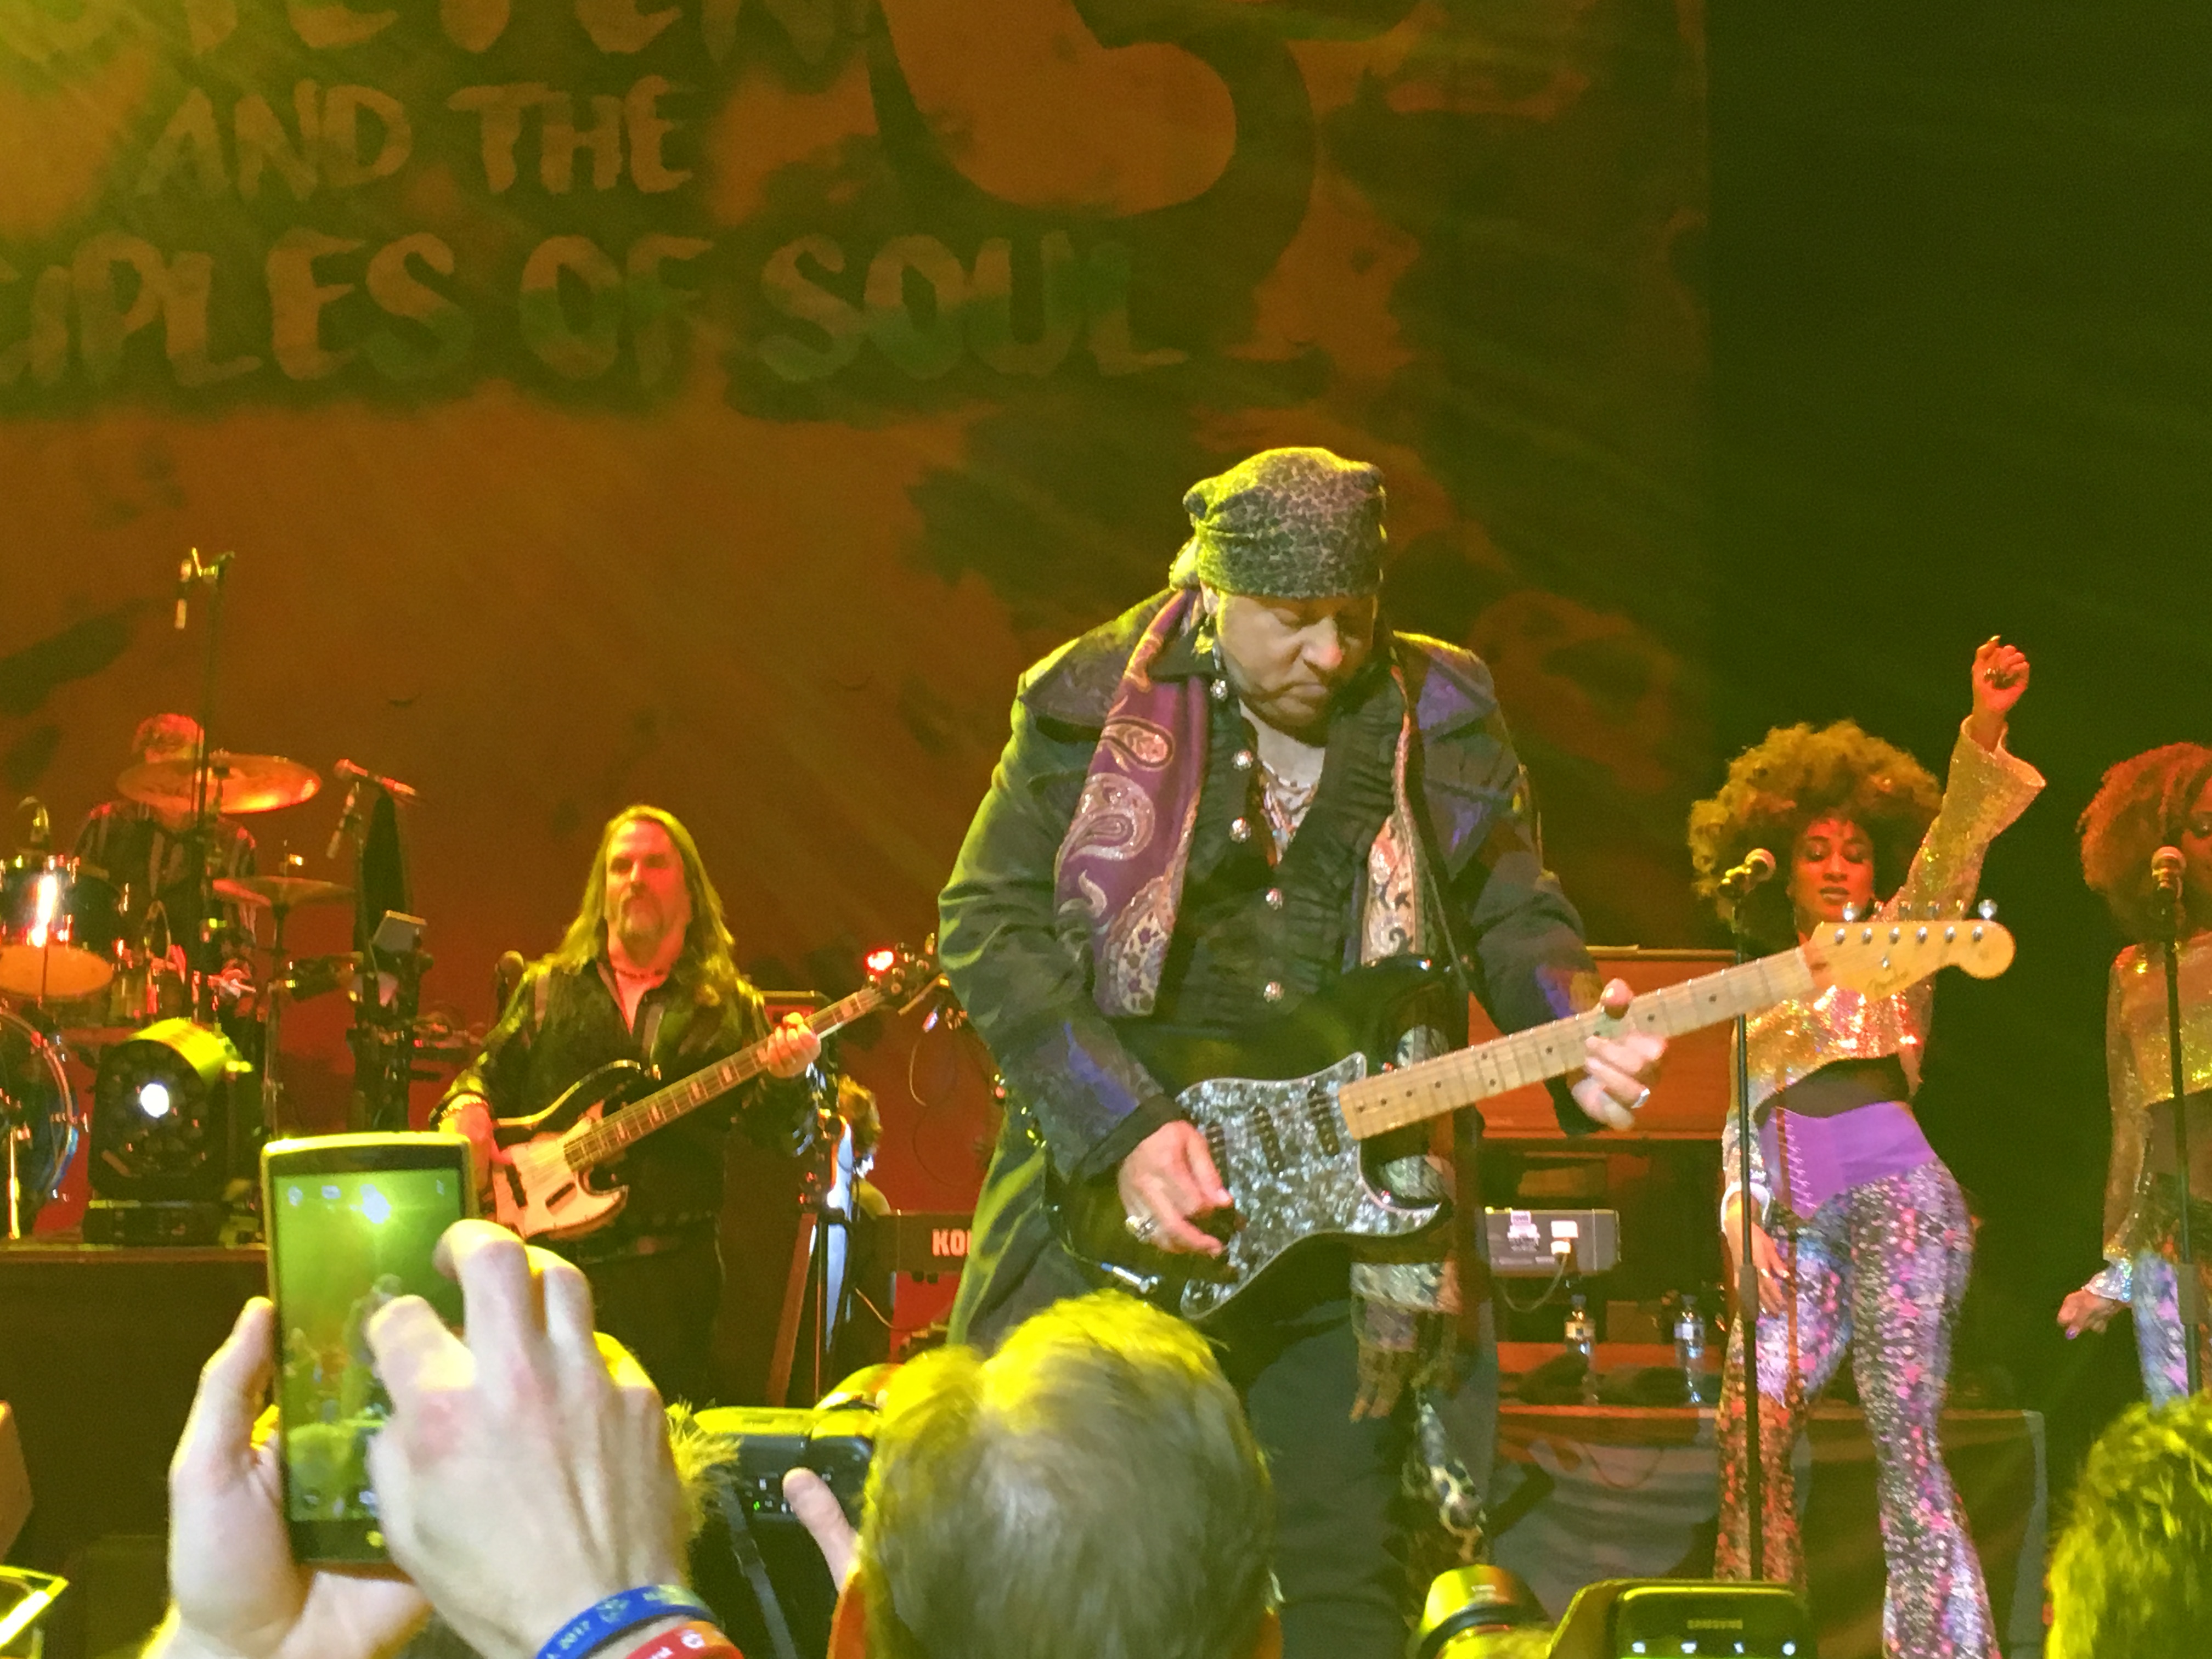 Concert: Little Steven & The Disciples of Soul – together we will make our stand